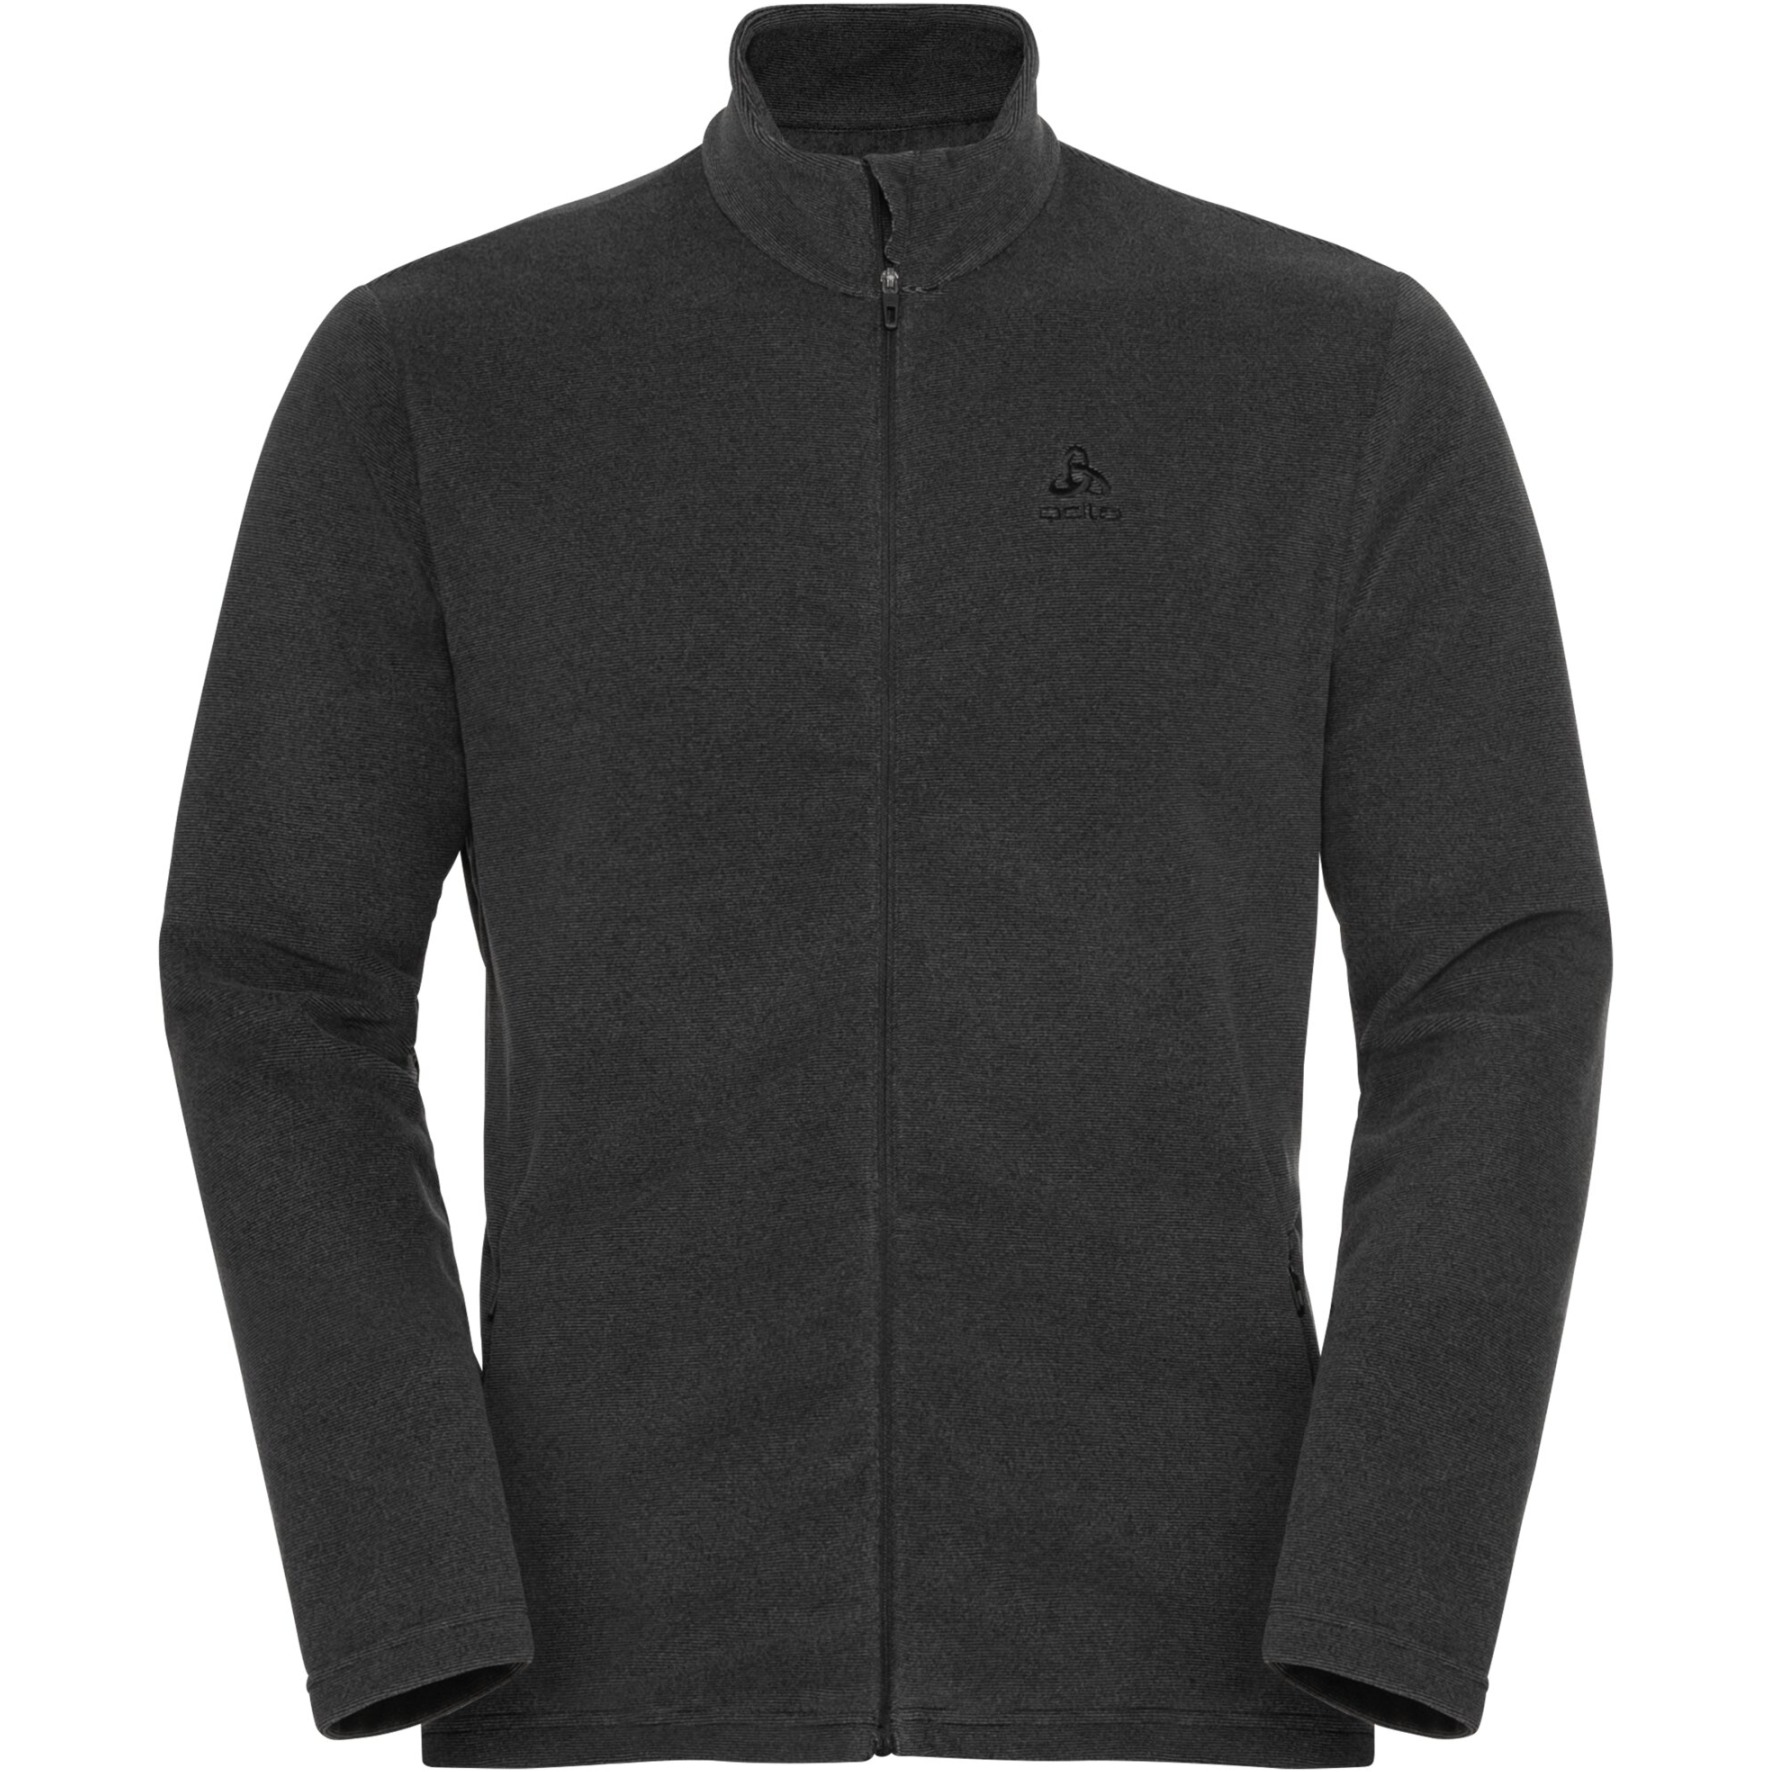 Picture of Odlo Roy Full-Zip Mid Layer Top Men - shale grey - black stripes